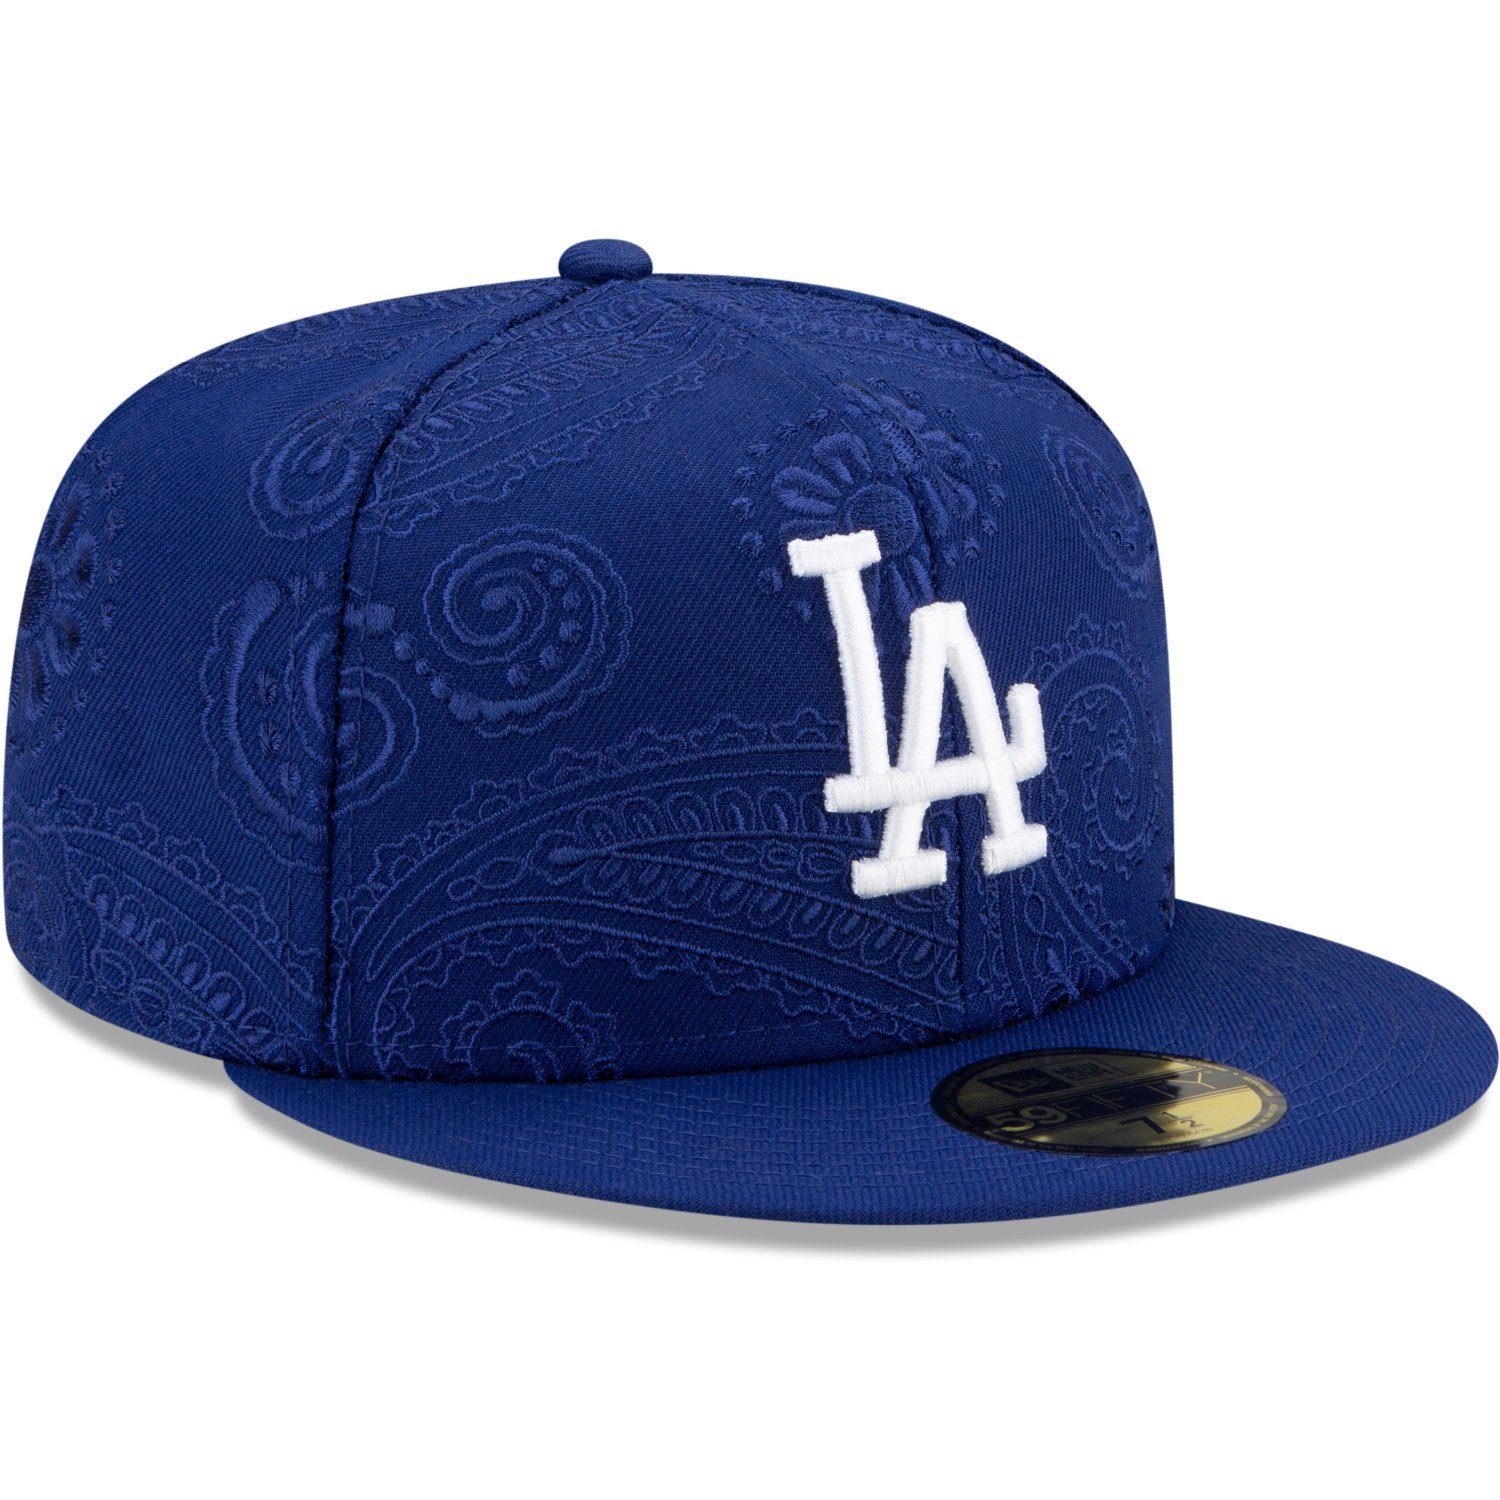 SWIRL New Fitted PAISLEY Angeles Cap Los Era Dodgers 59Fifty